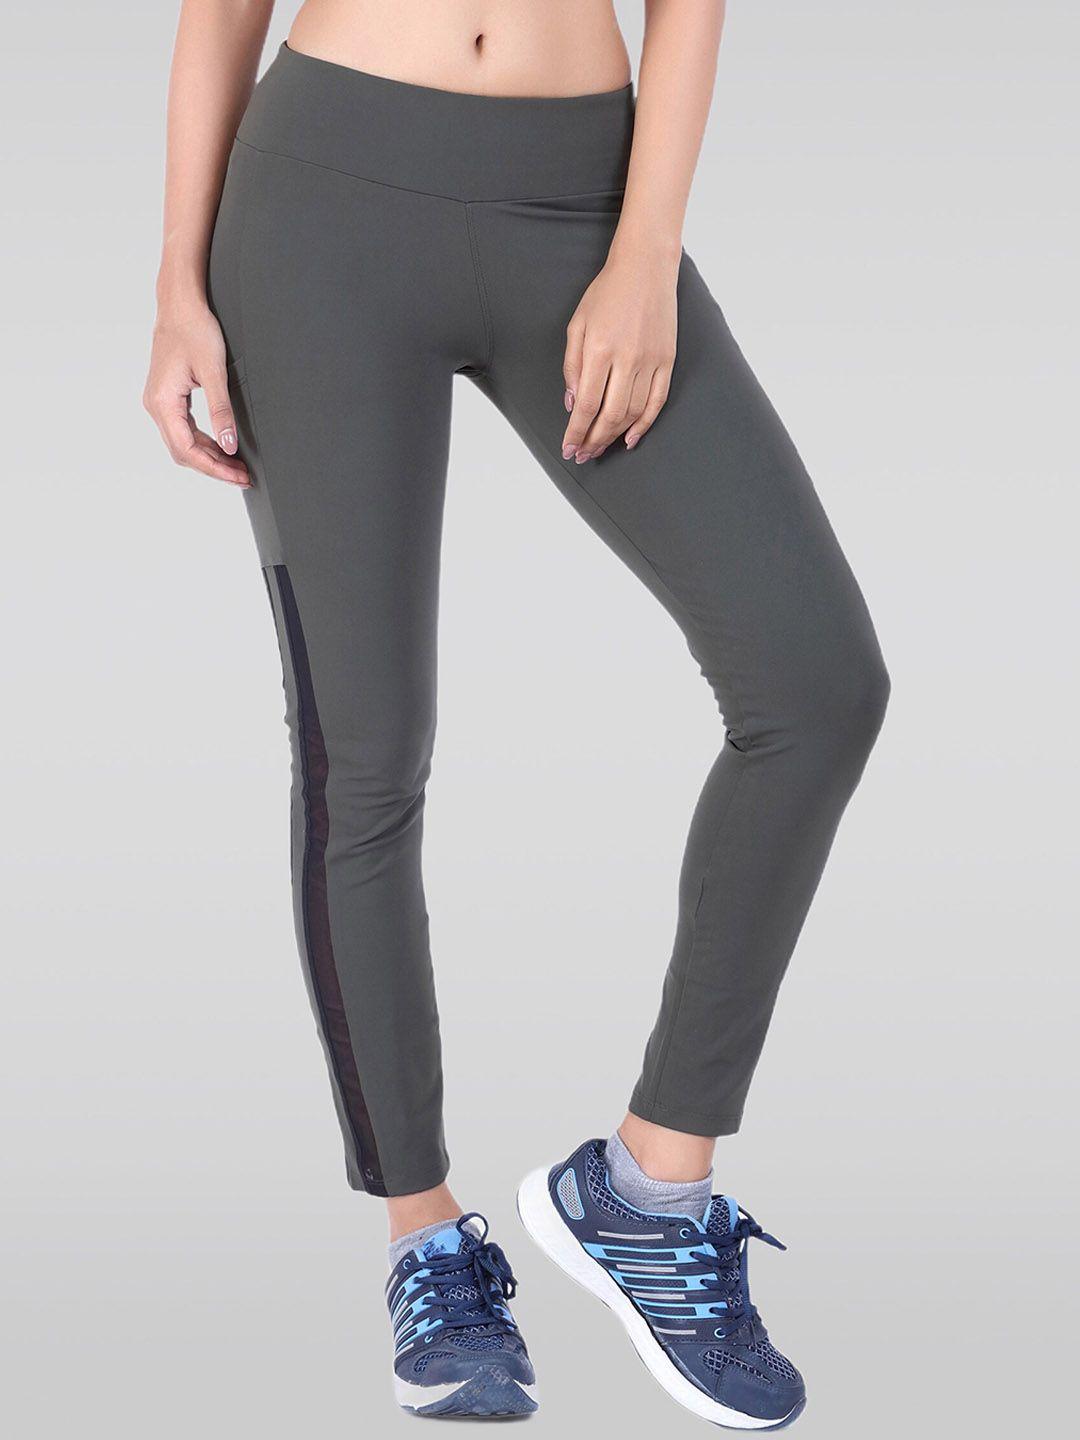 laasa-sports-women-slim-fit-ankle-length-gym-tights